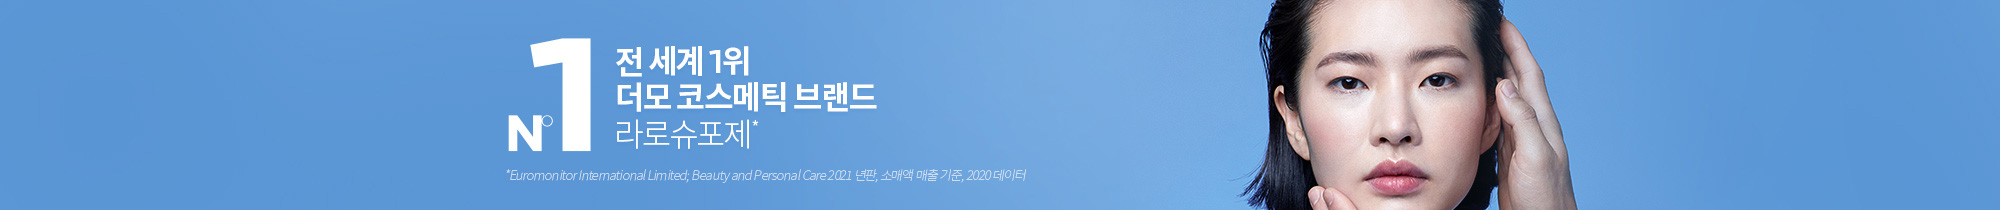 *Euromonitor International Limited; Beauty and Personal Care 2021 년판, 소매액 매출 기준, 2020 데이터